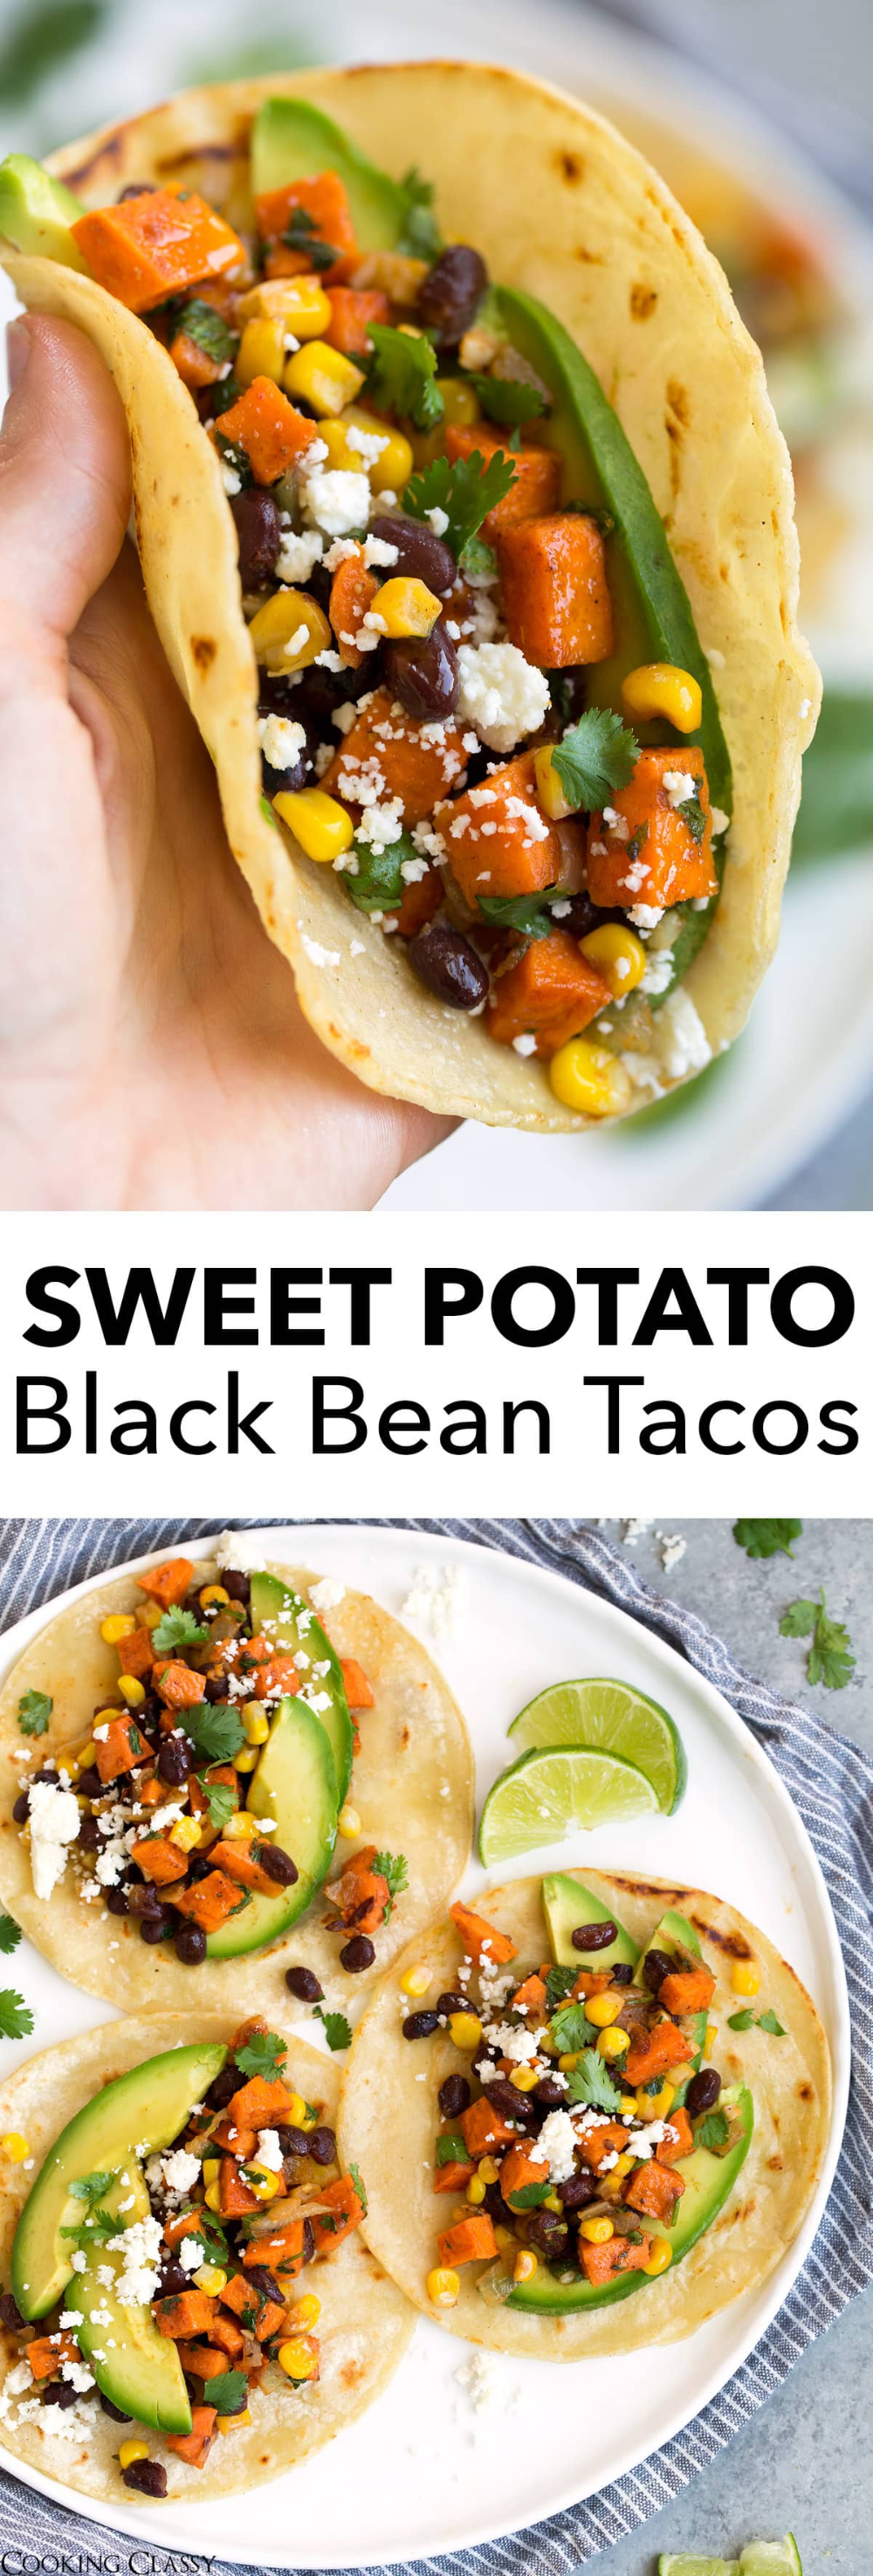 Healthy Sweet Potato and Black Bean Tacos | Cooking Classy -   19 healthy recipes Sweet health ideas